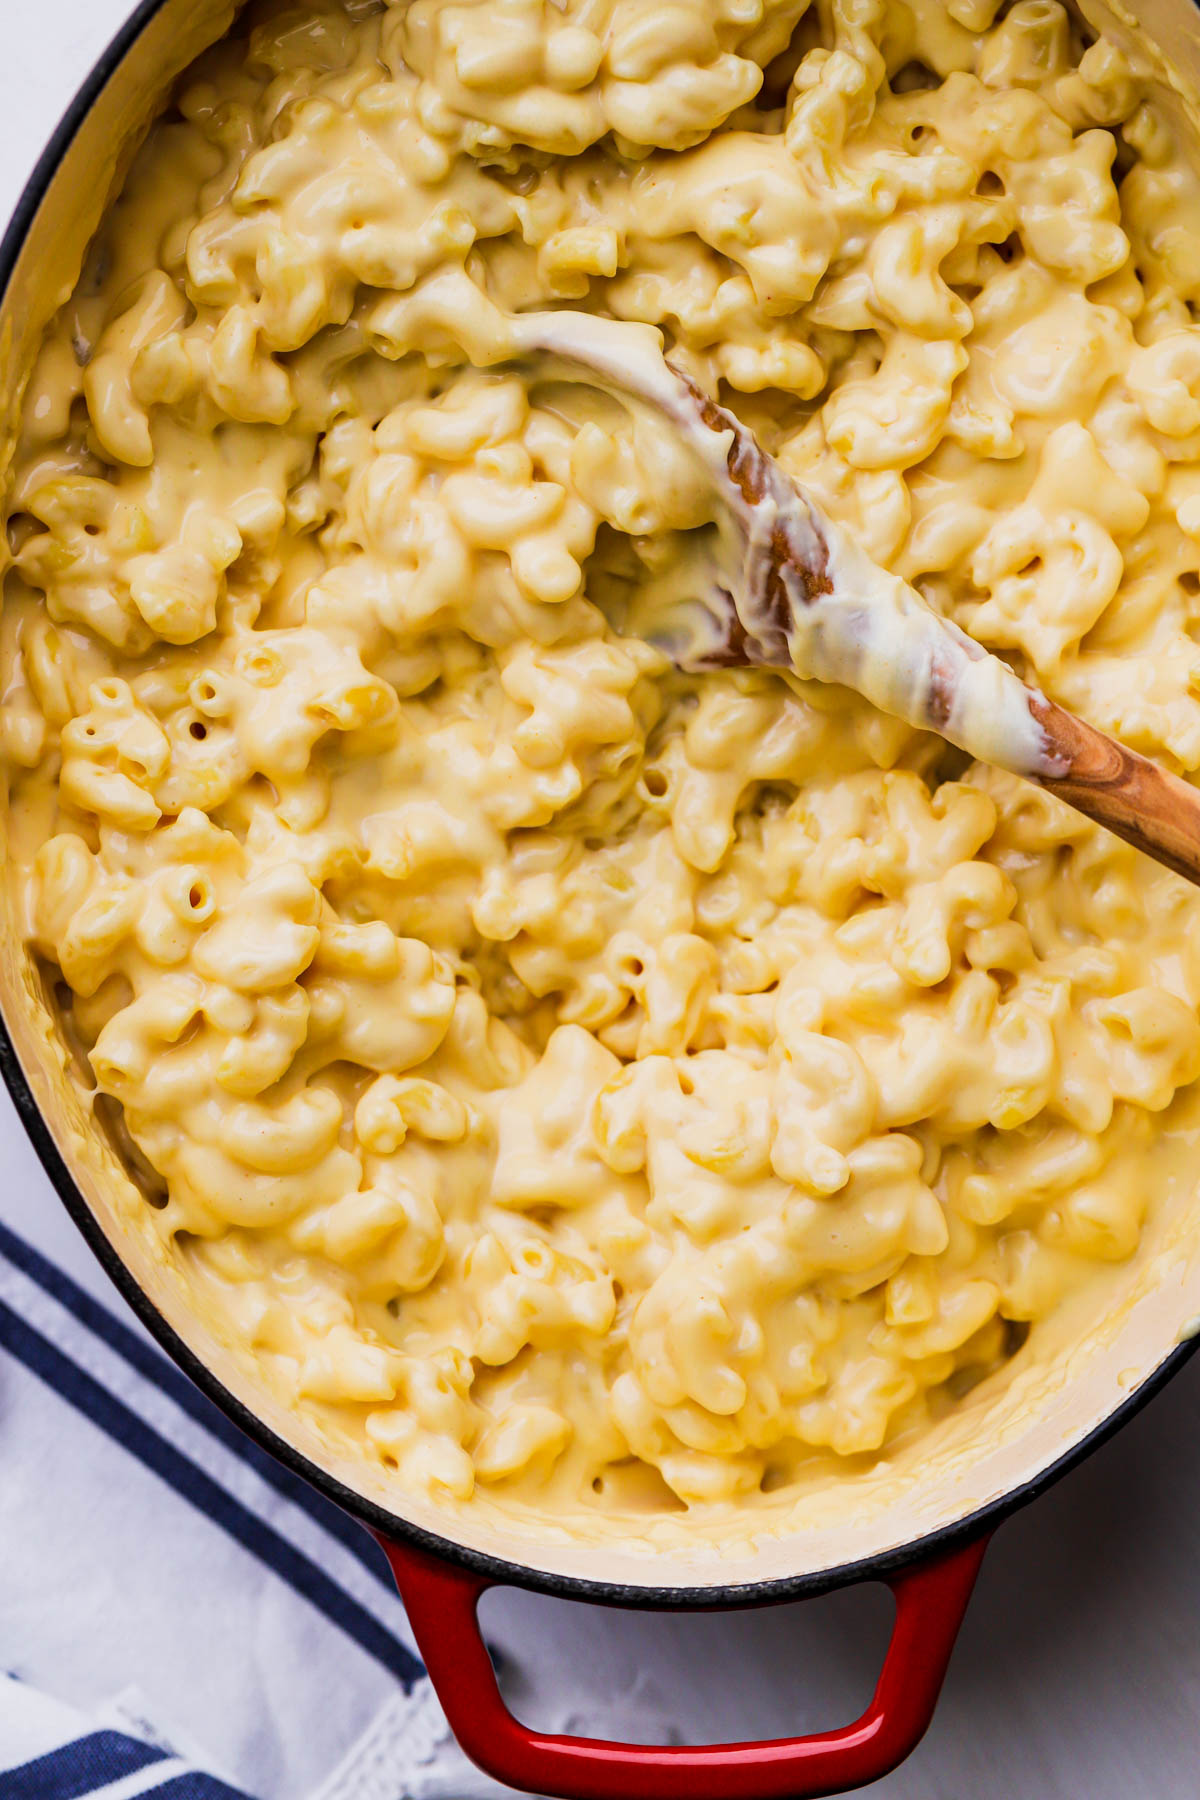 Cooked macaroni tossed with cheese sauce.  